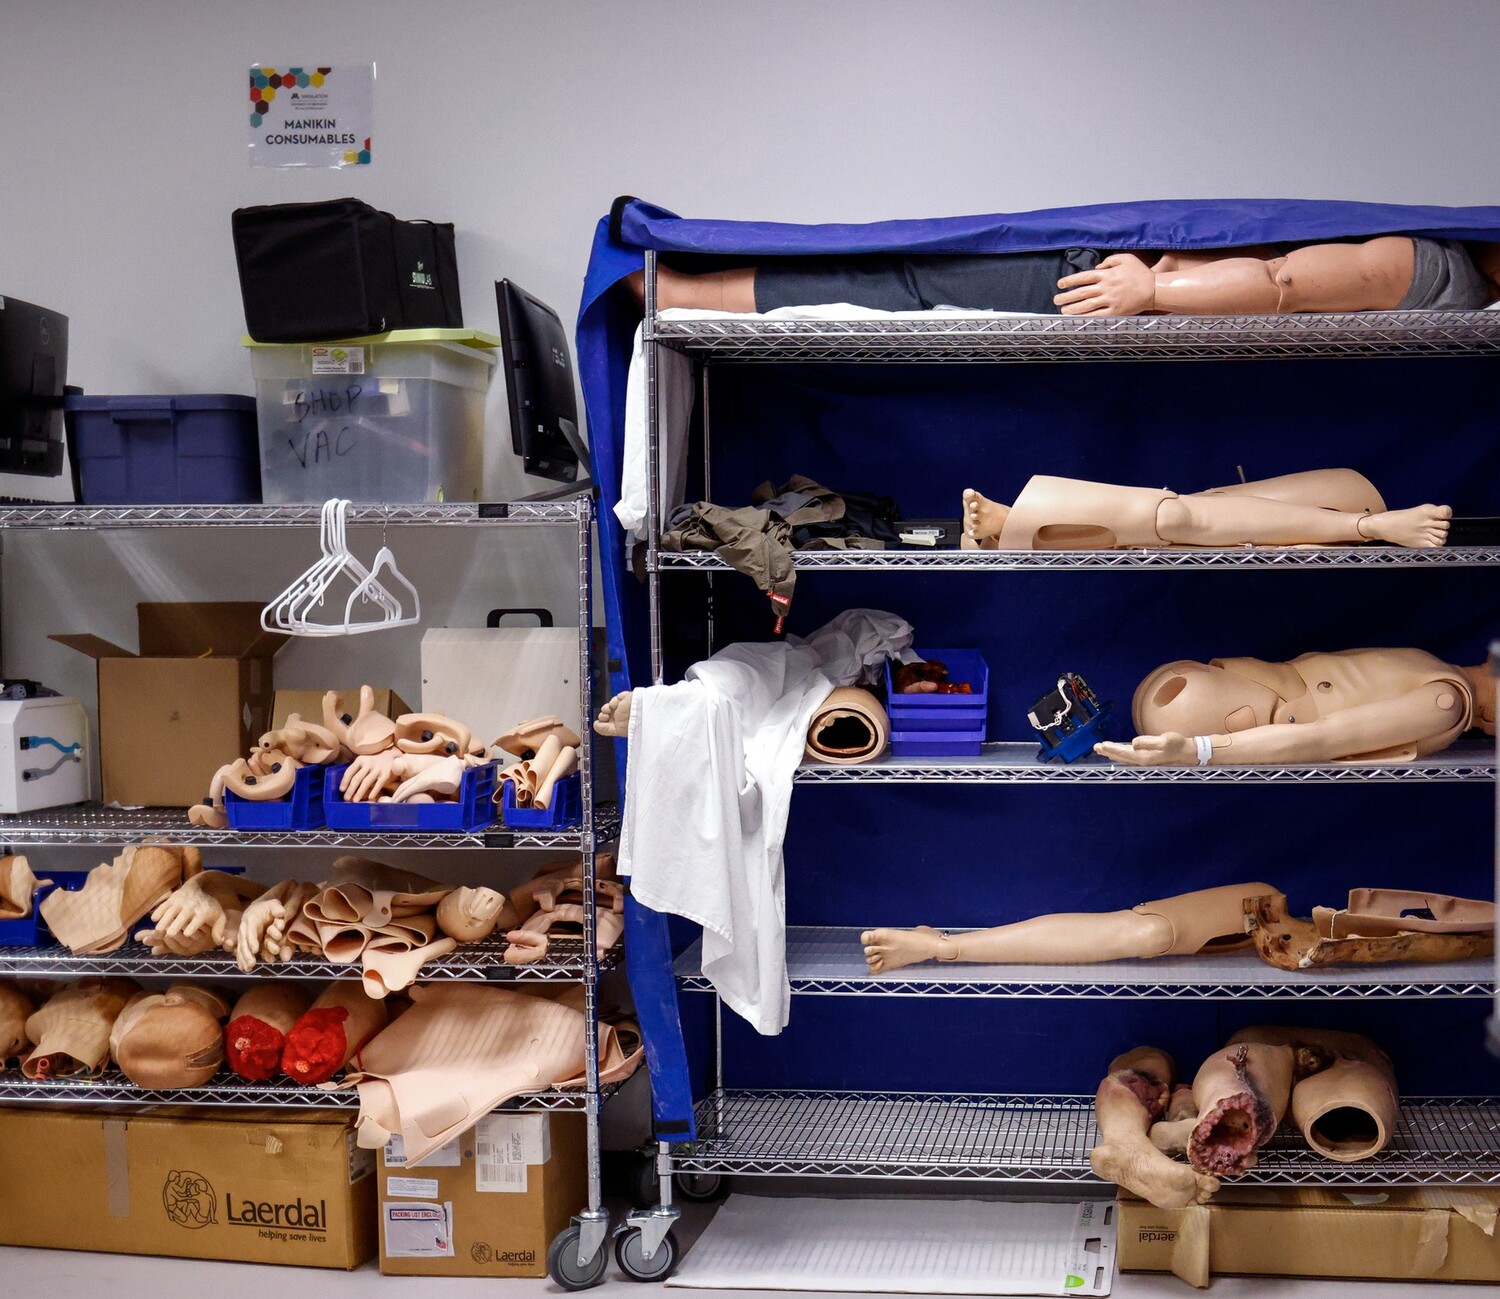 replicas of the human body and human body parts are stacked on shelves